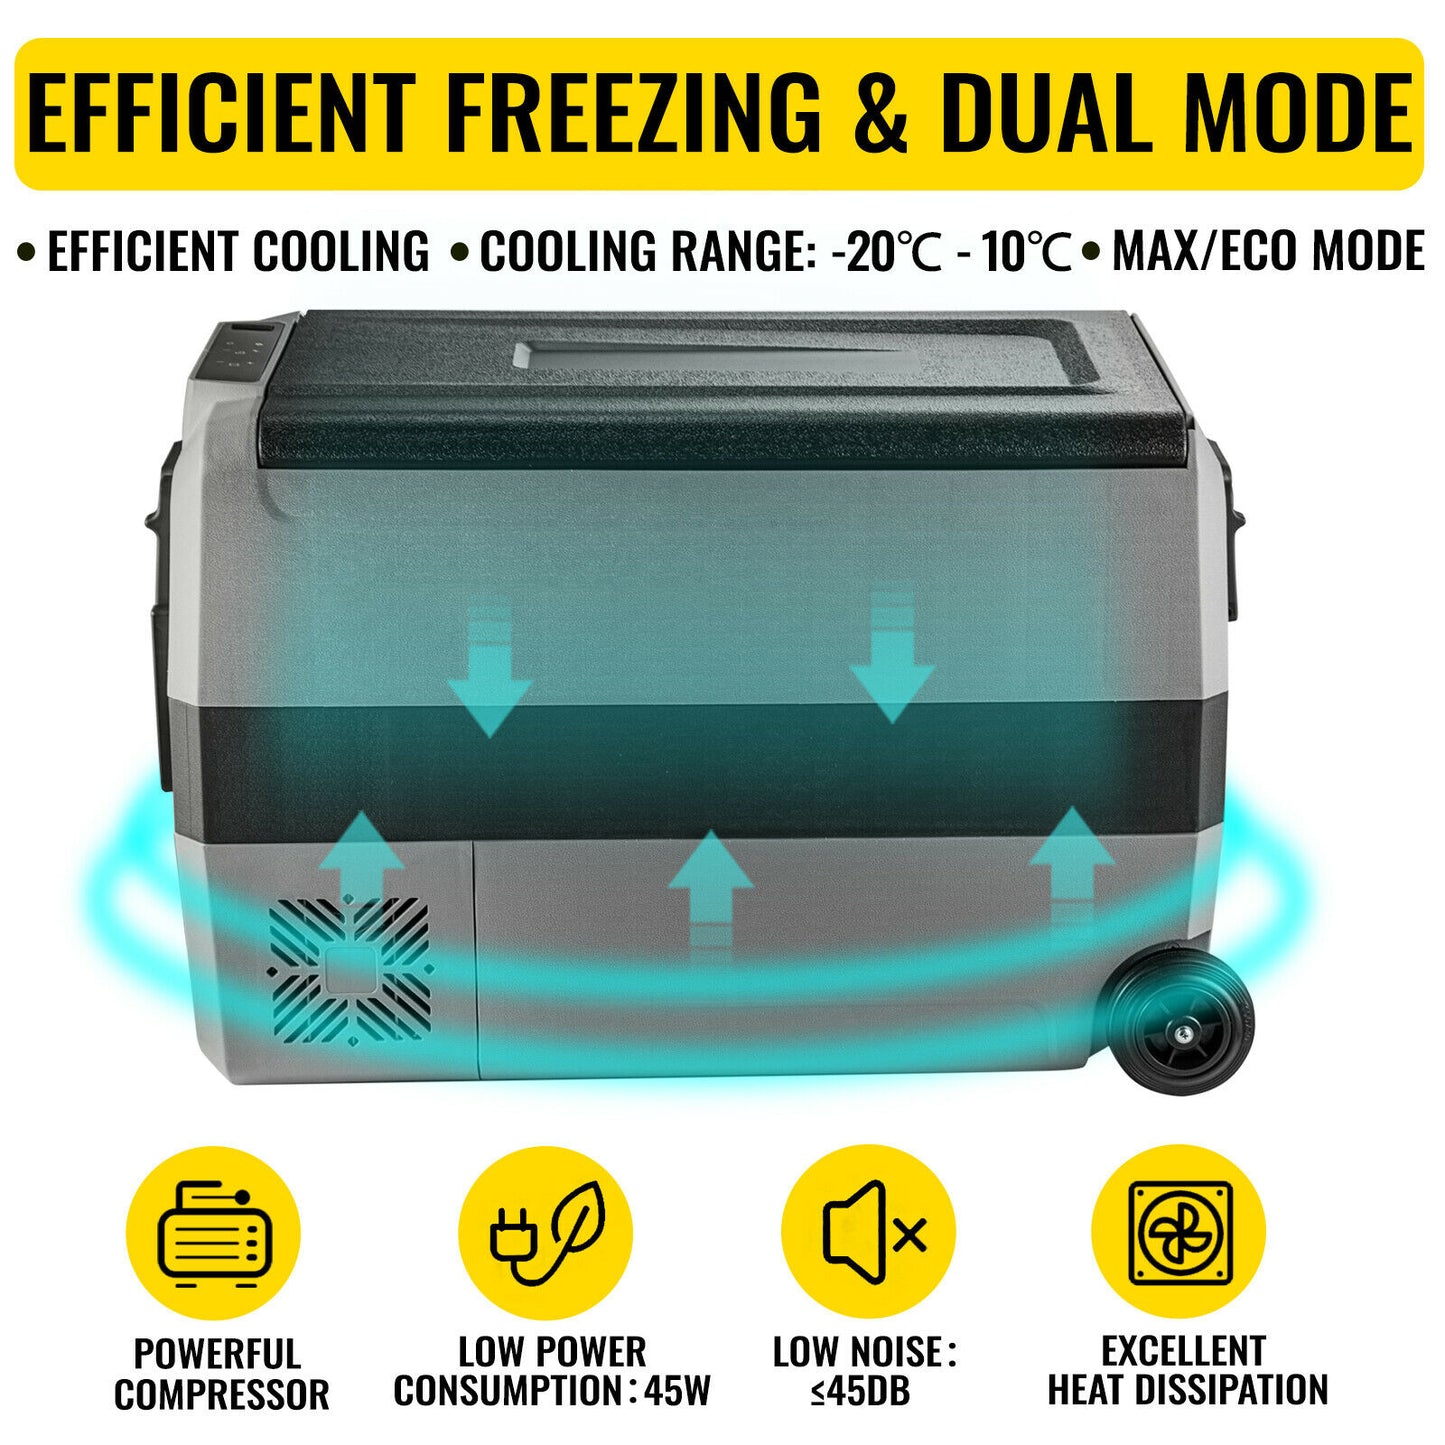 36L 50L 60L Portable Car Refrigerator Freezer With Wheels & Handle 12/24V DC 100-240 AC.  Great for RV Builds, Camping, Picnics